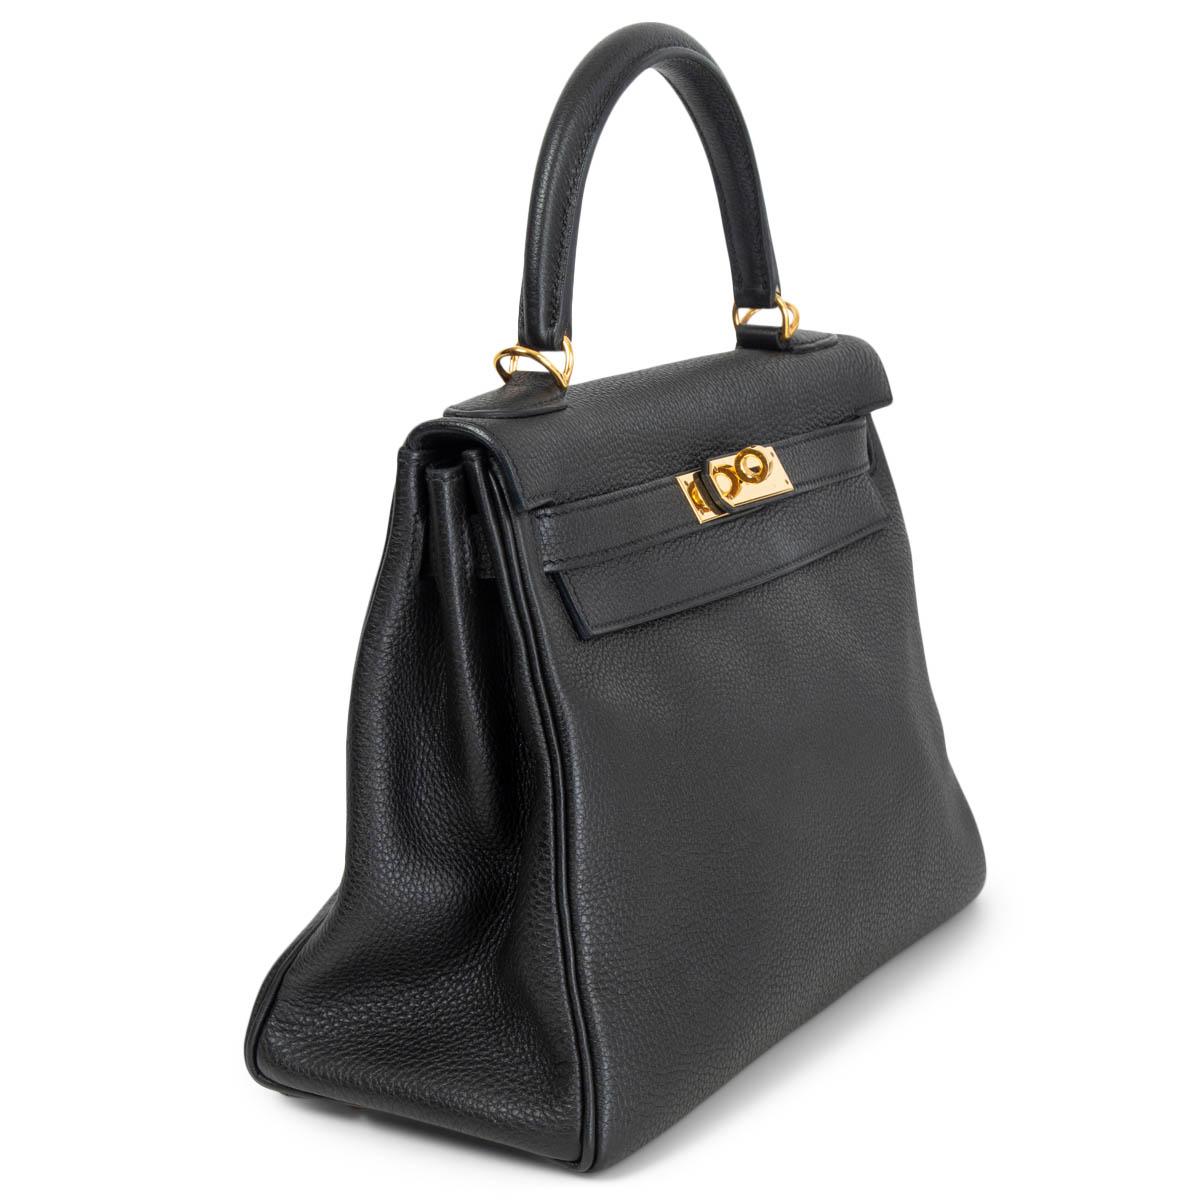 100% authentic Hermes 'Kelly II 28 Retourner' bag in Noir (black) Veau Togo leather with gold hardware. Lined in Chevre (goat skin) with a divided open pocket against the front and a zipper pocket against the back. Has been carried and is in